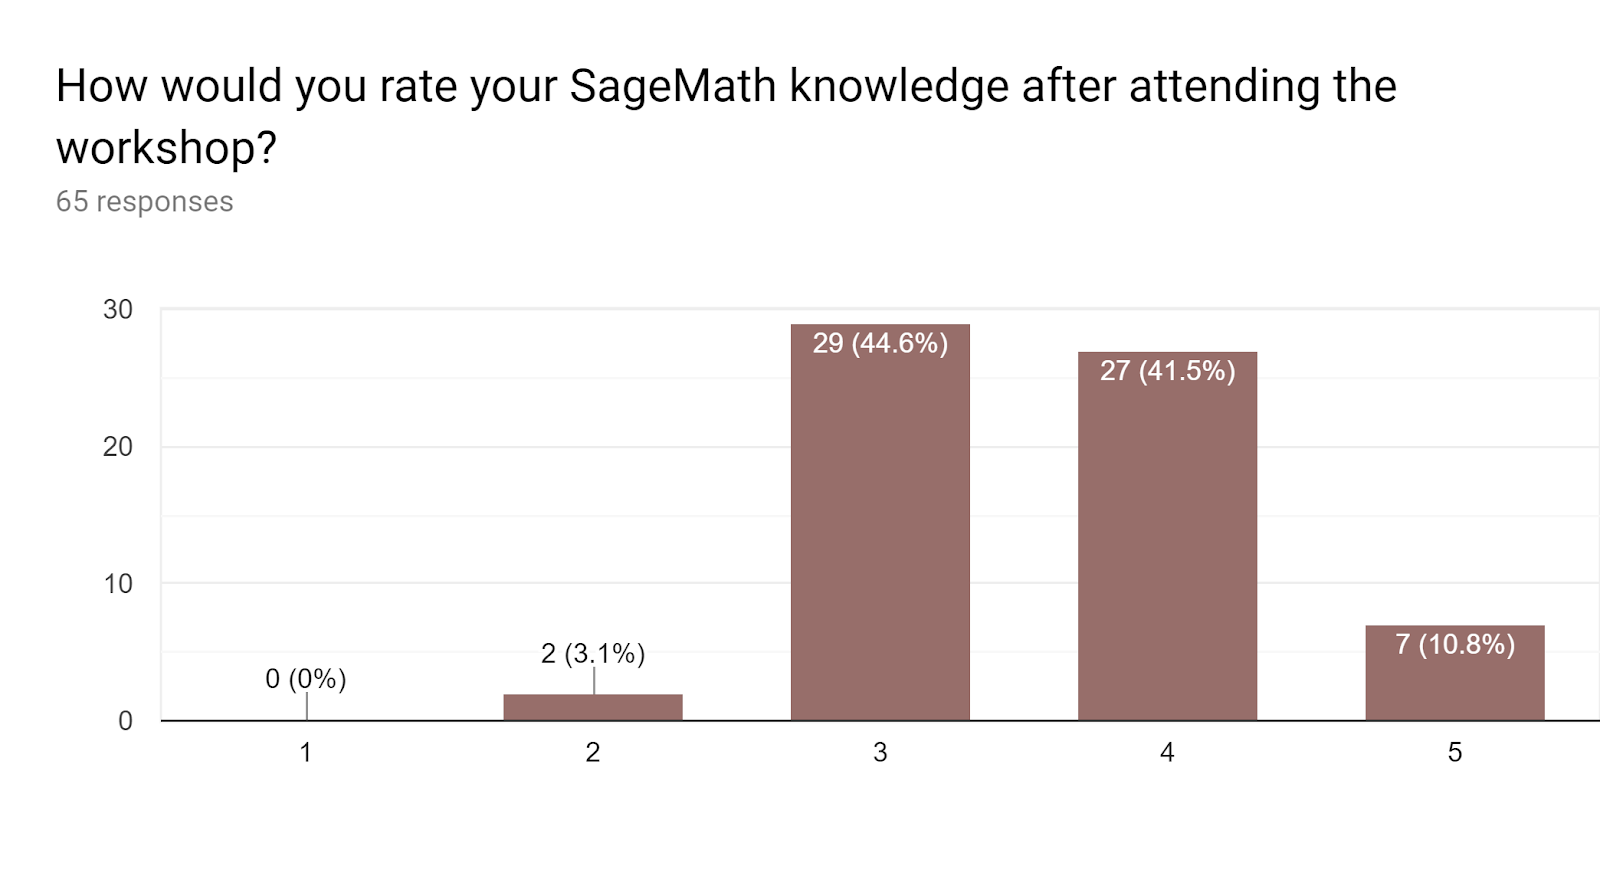 Sage knowledge following to the workshop: 1: 0%; 2: 3.1%; 3: 44.6%; 4: 41.5%; 5: 10.8%